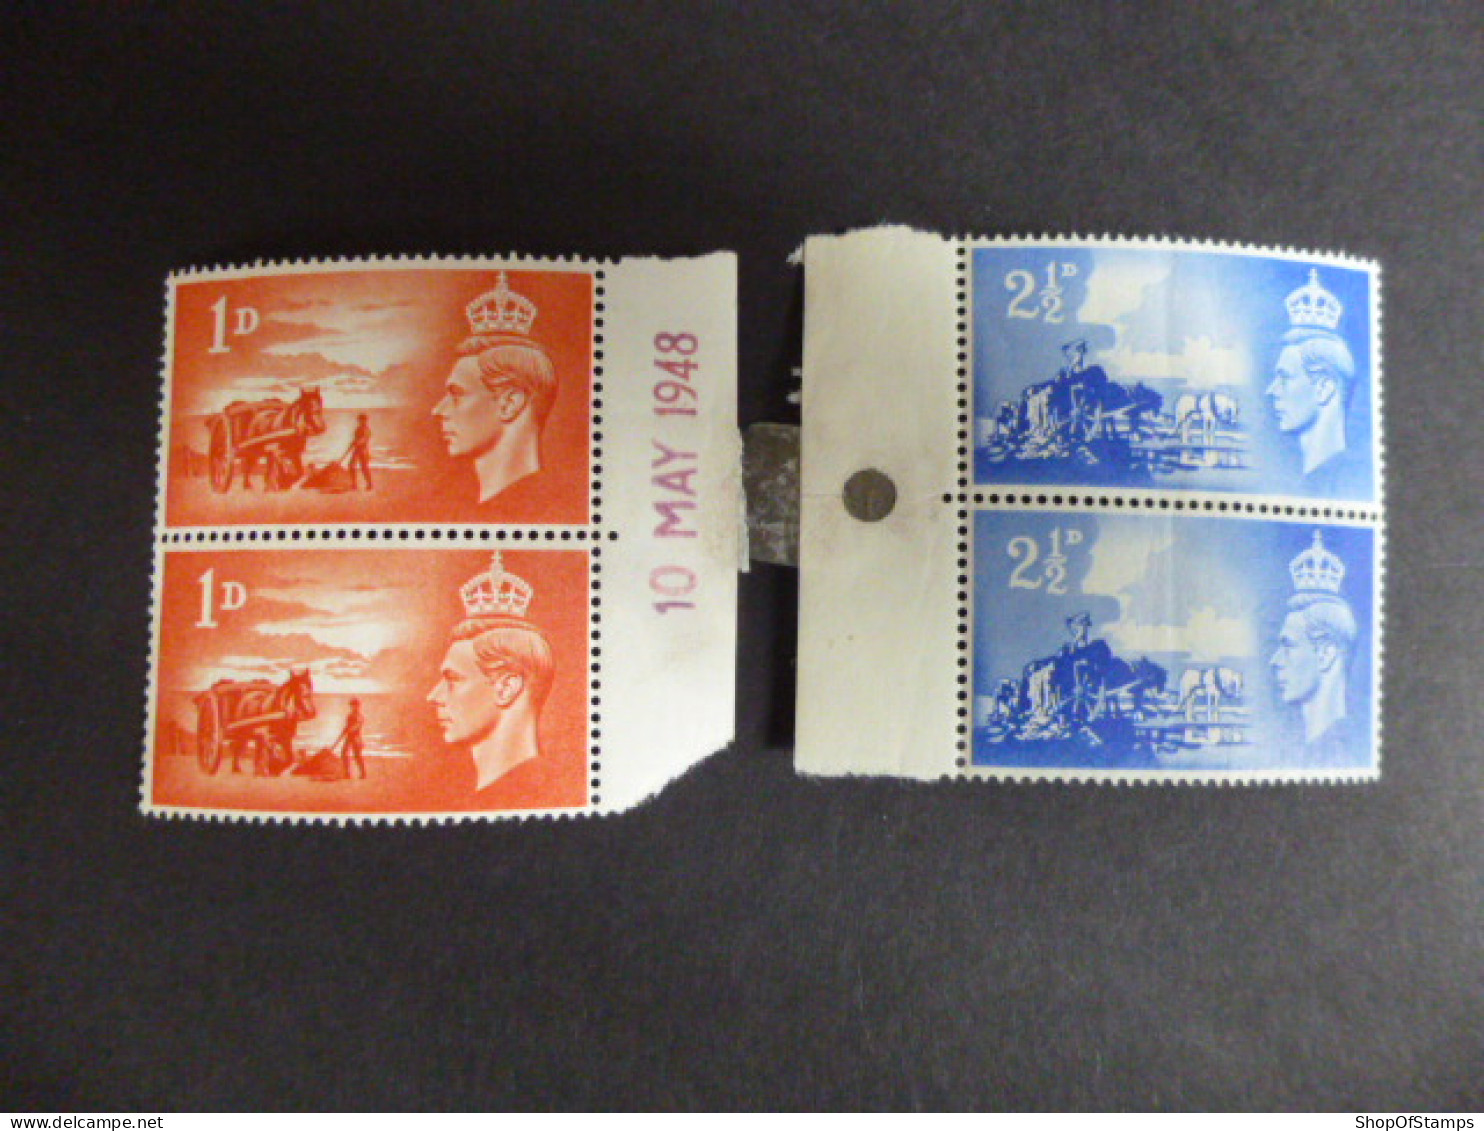 CHANNEL ISLANDS 01-02 MINT PAIR WITH ISSUE DATE STAMP - Non Classés